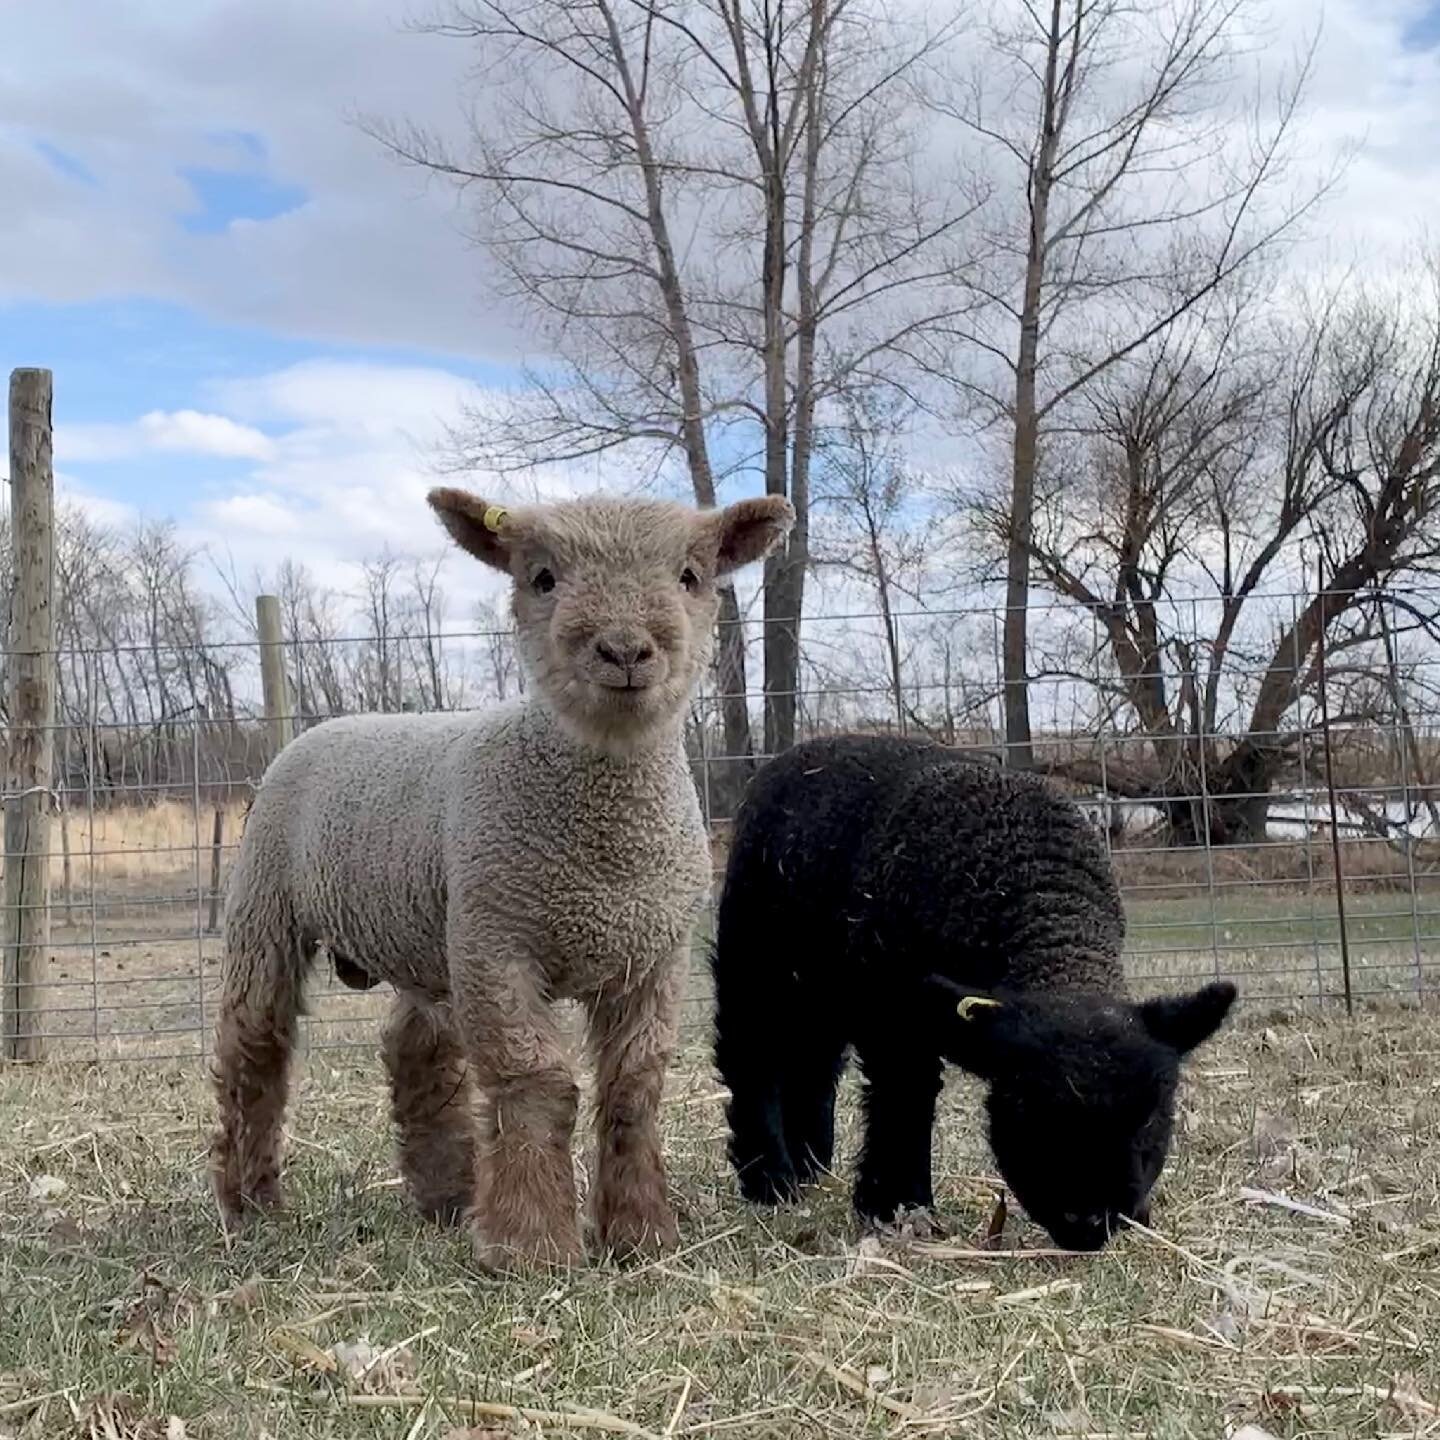 Meet Salt and Pepper! These twin boys were my first born this spring.  They are growing so darn fast.  They will be staying rams and will be going together to their new home this summer!  When a customer asks for rams, the lambs need to be carefully 